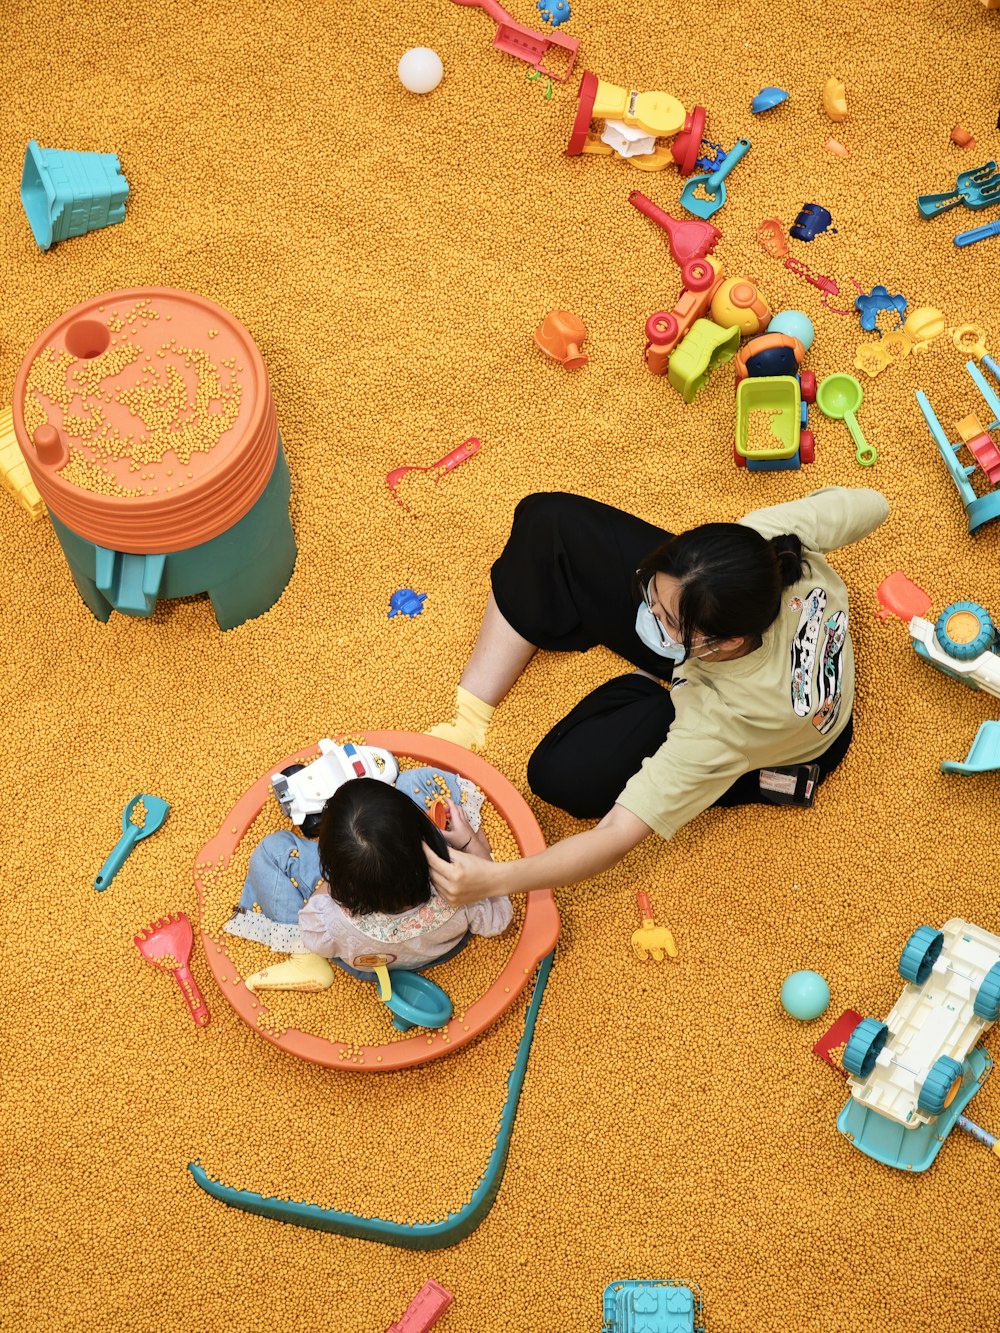 two children playing with toys on the floor